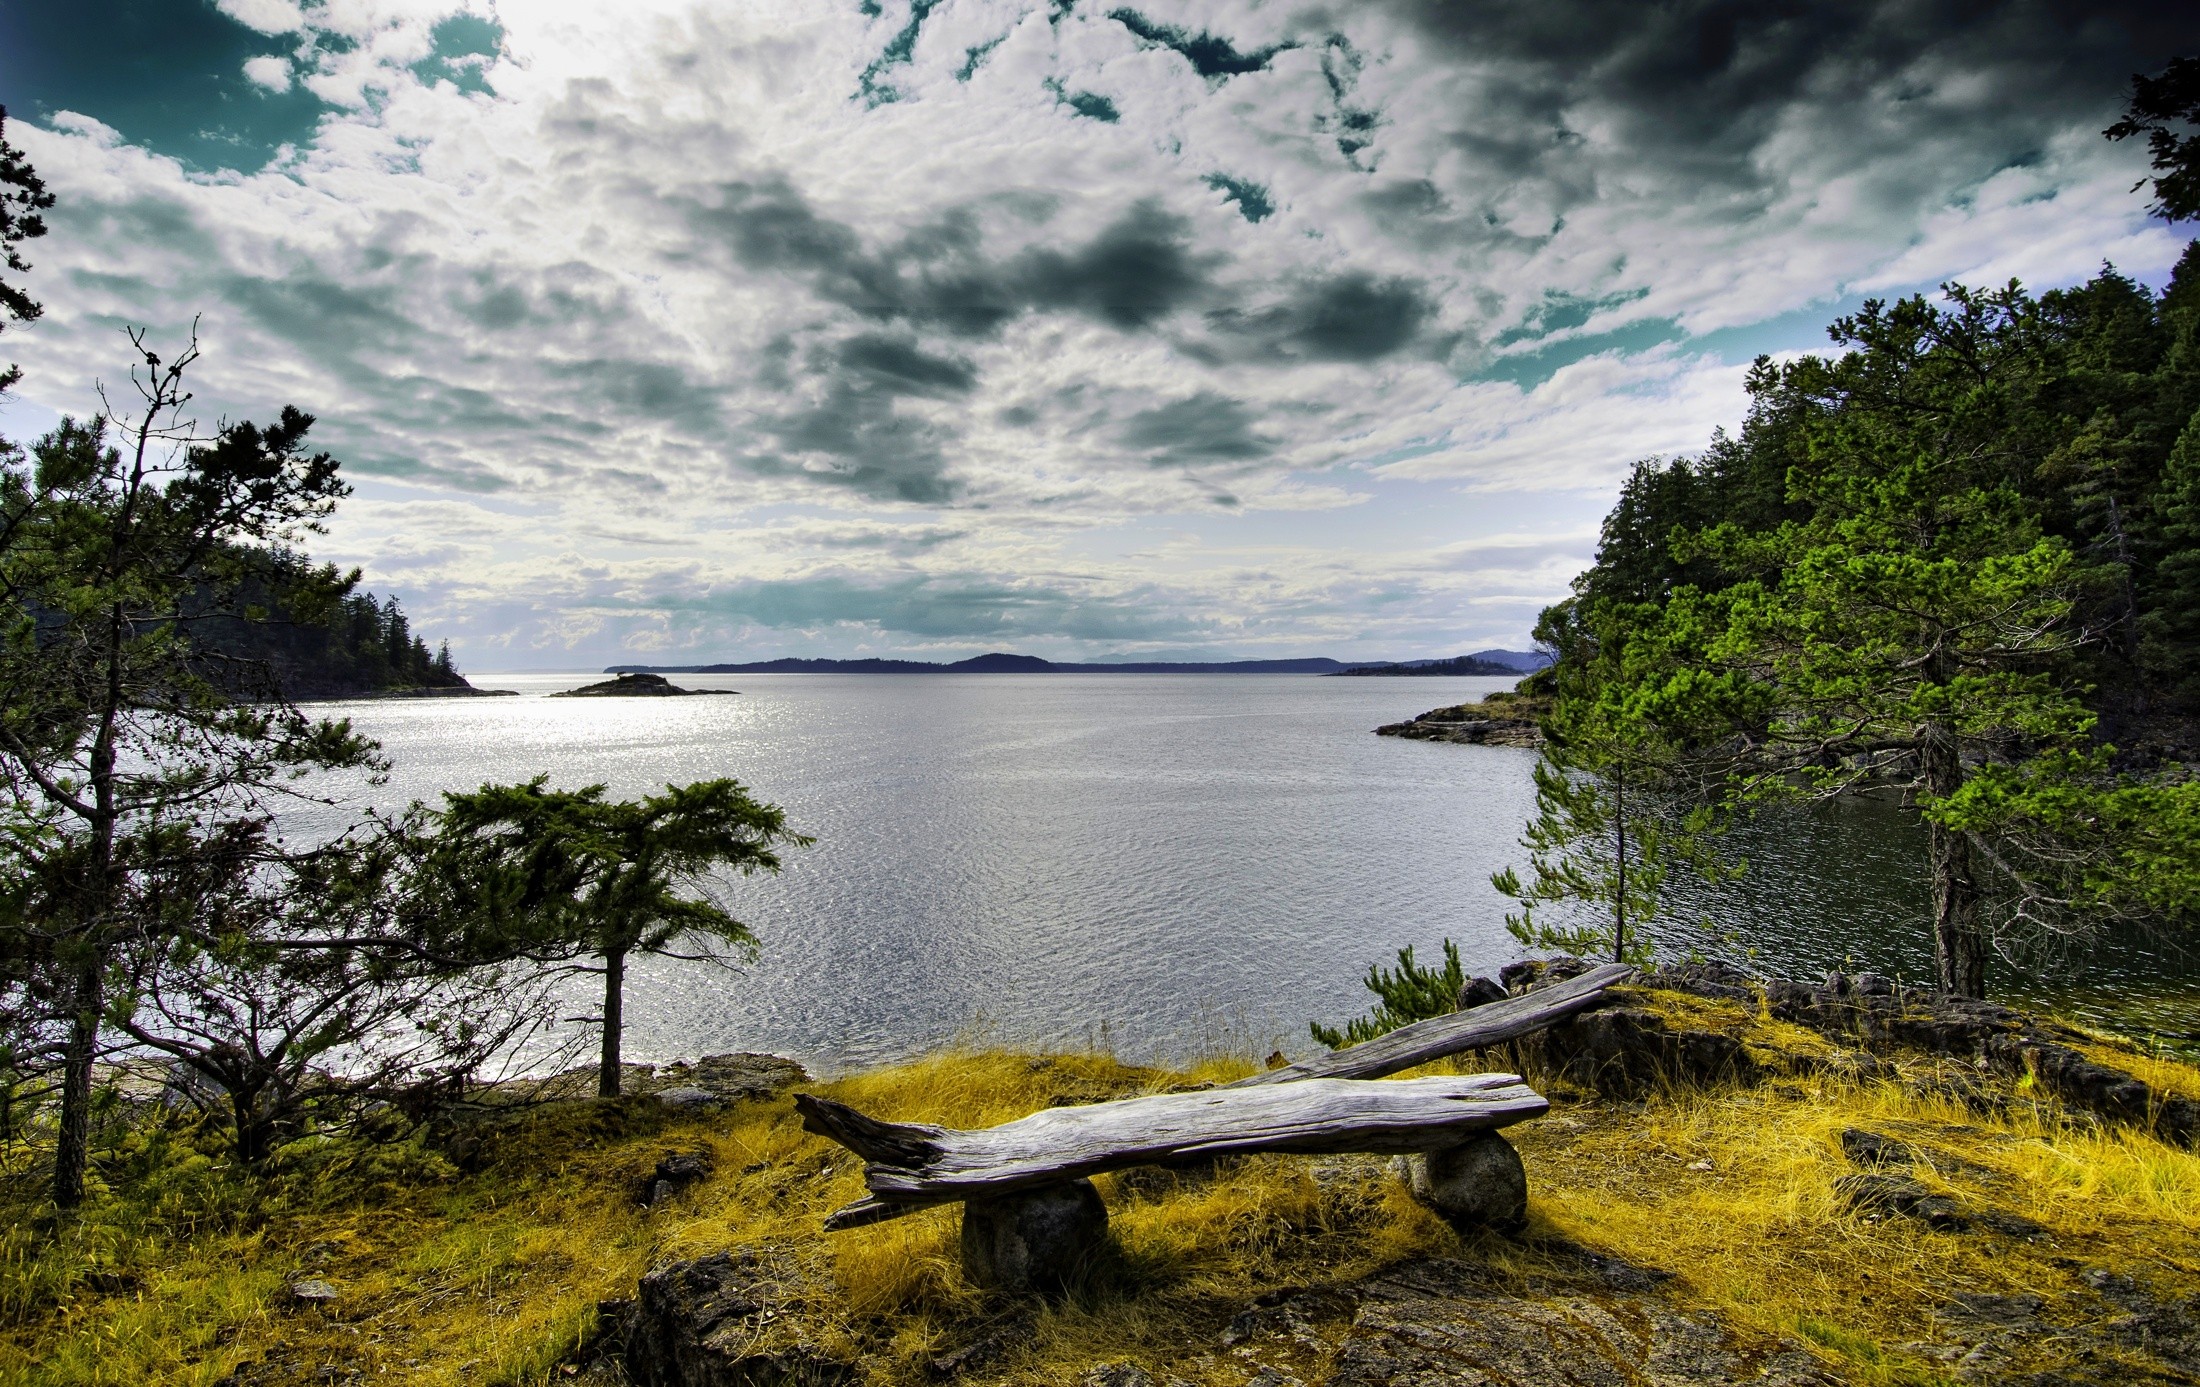 General 2200x1387 sea far view water trees lake bench pine trees nature outdoors sky